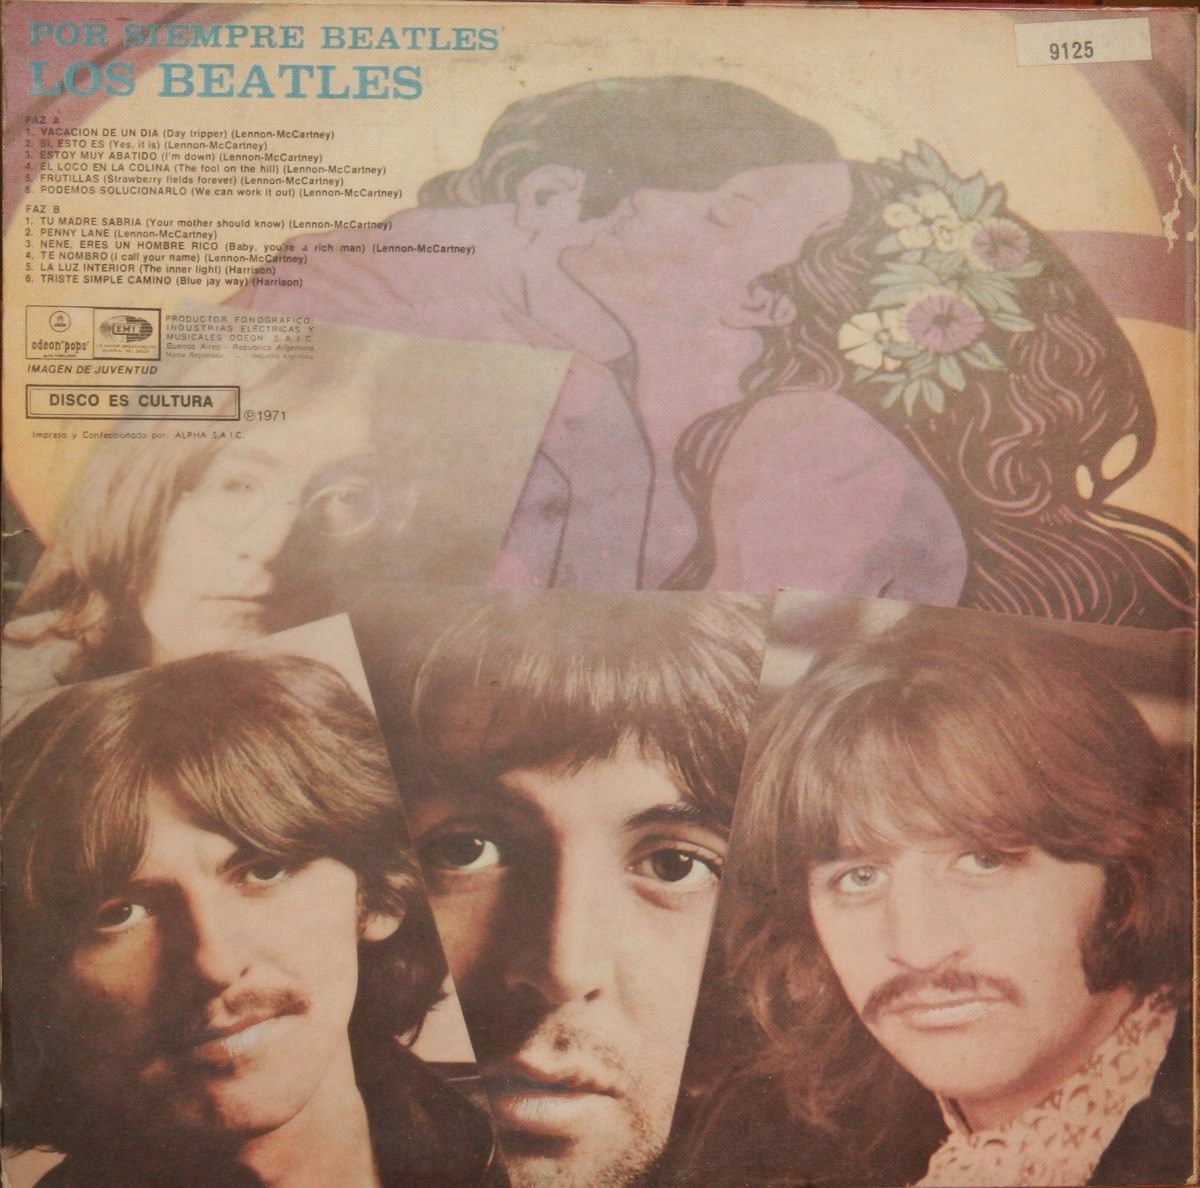 The Daily Beatle has moved!: That Spanish Beatles album